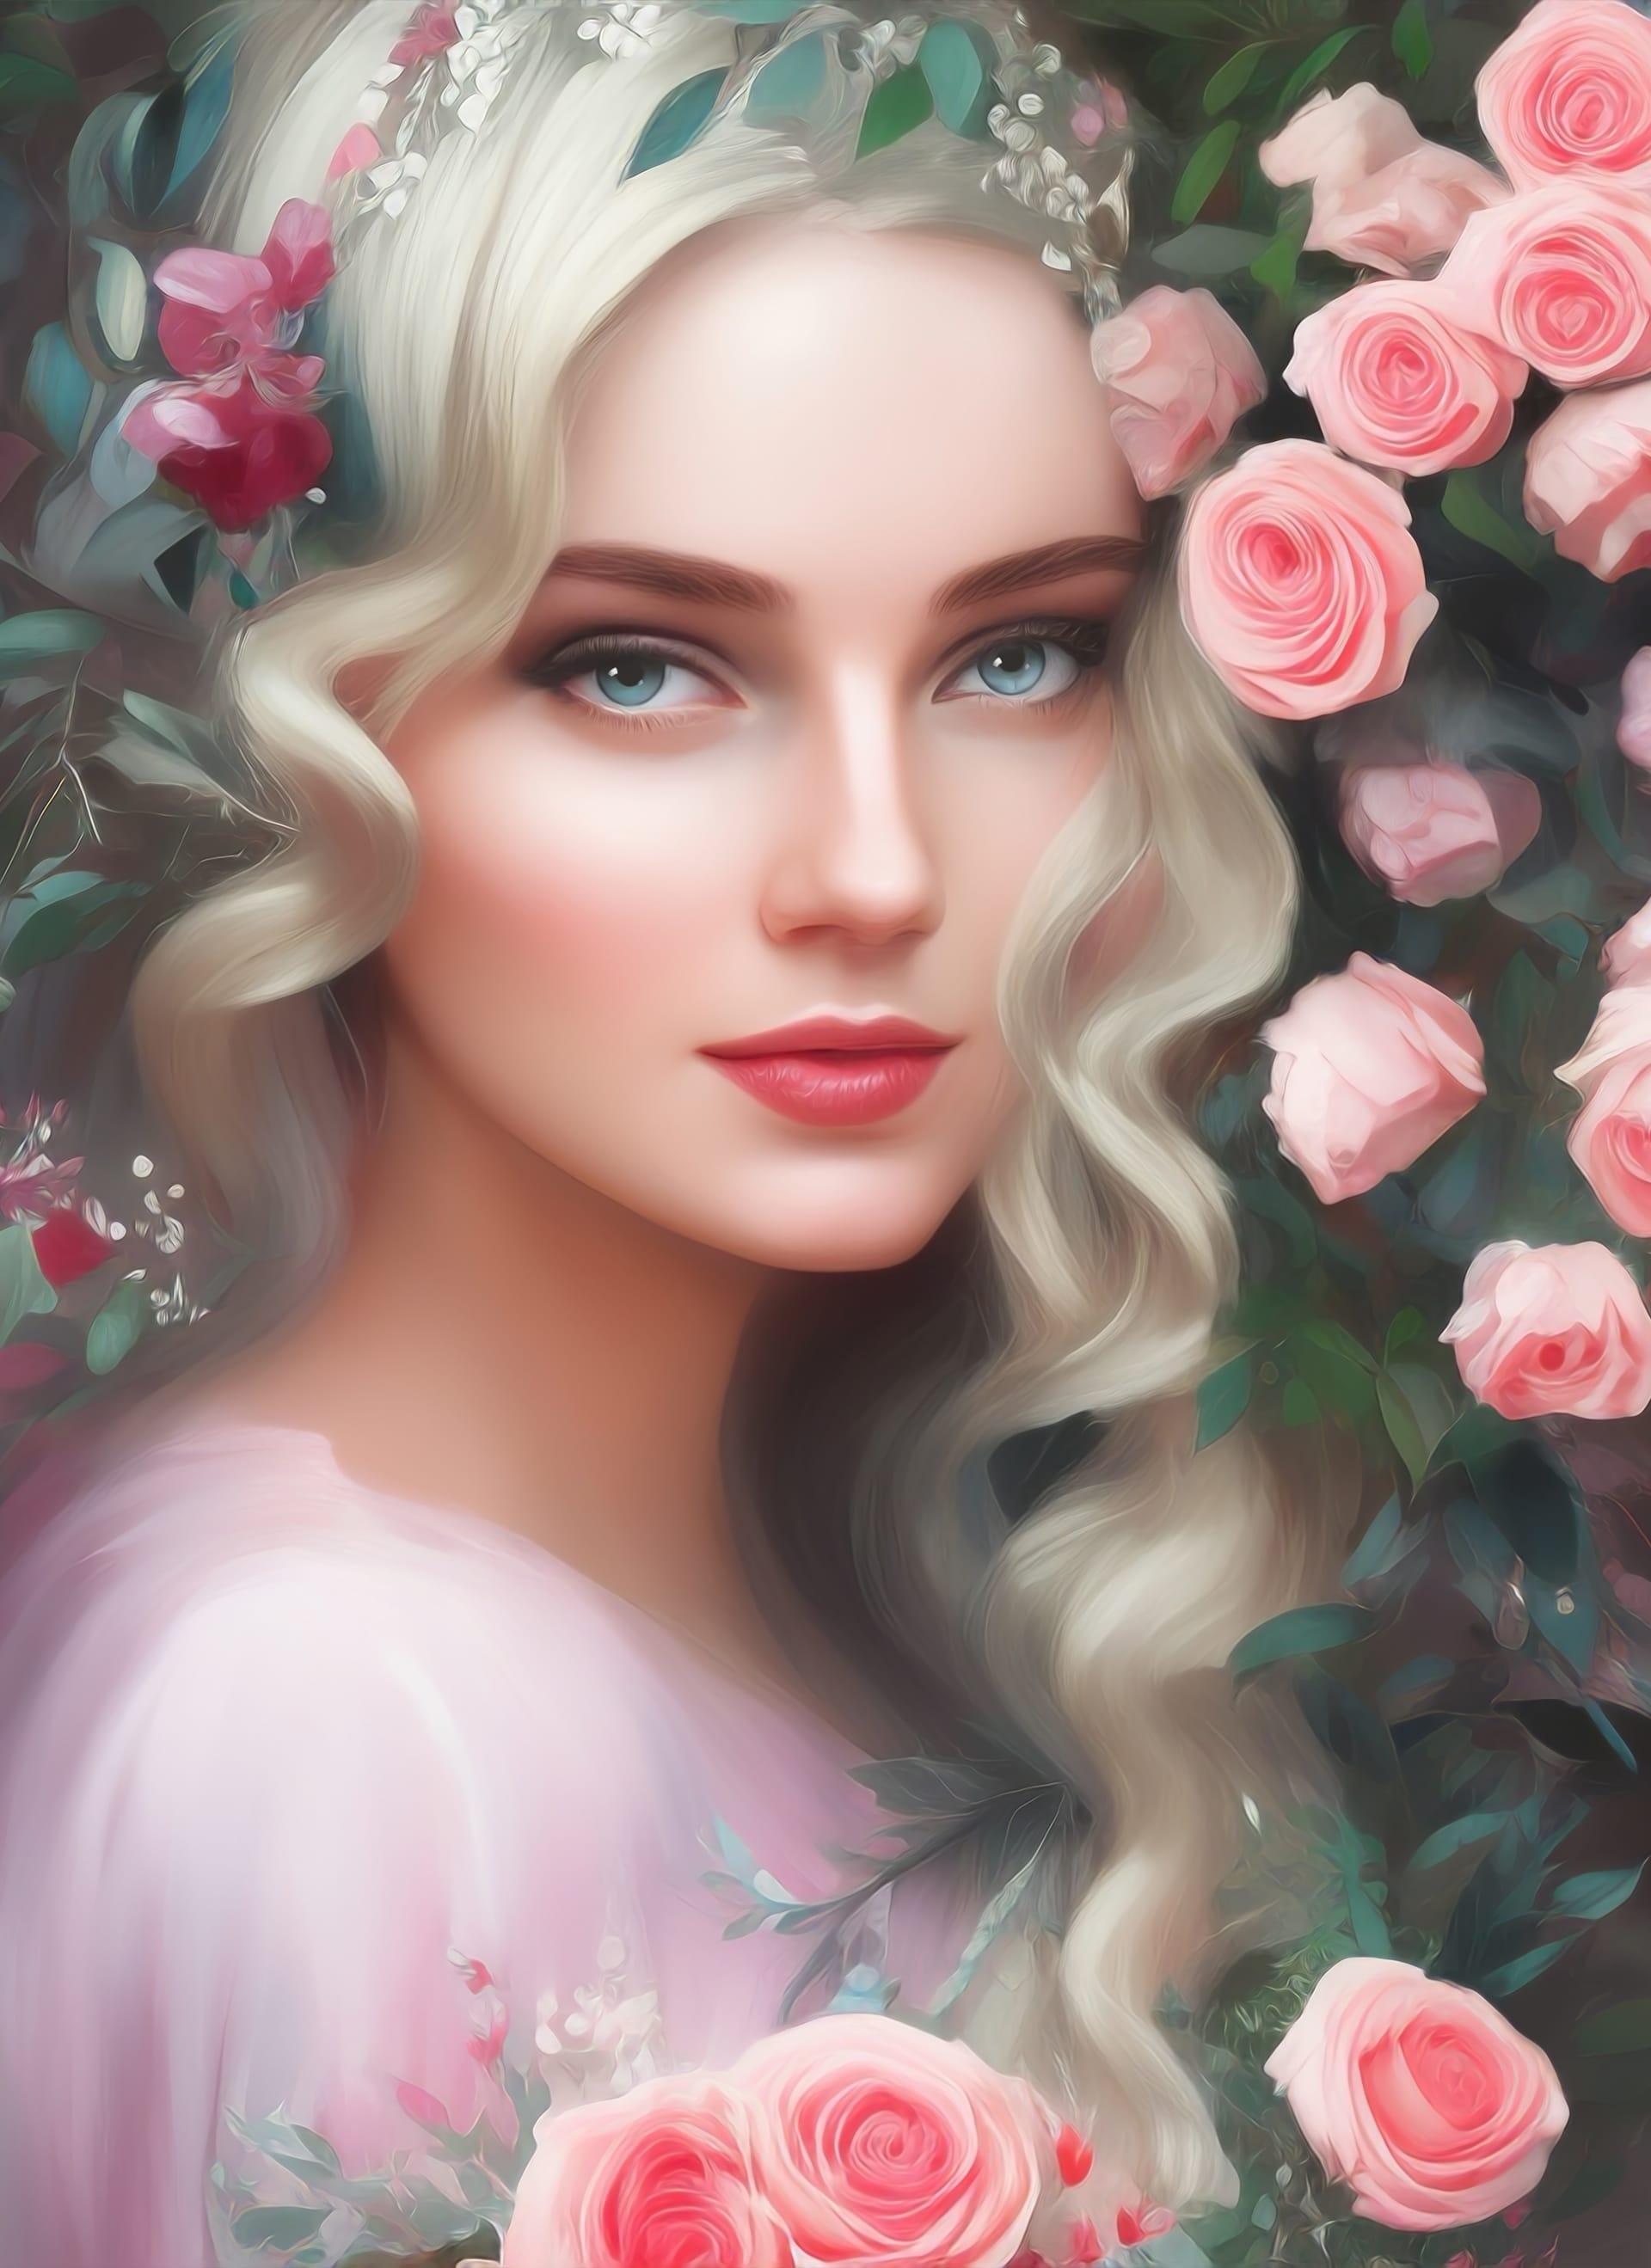 Portrait beautiful woman with flowers roses flower profile pic